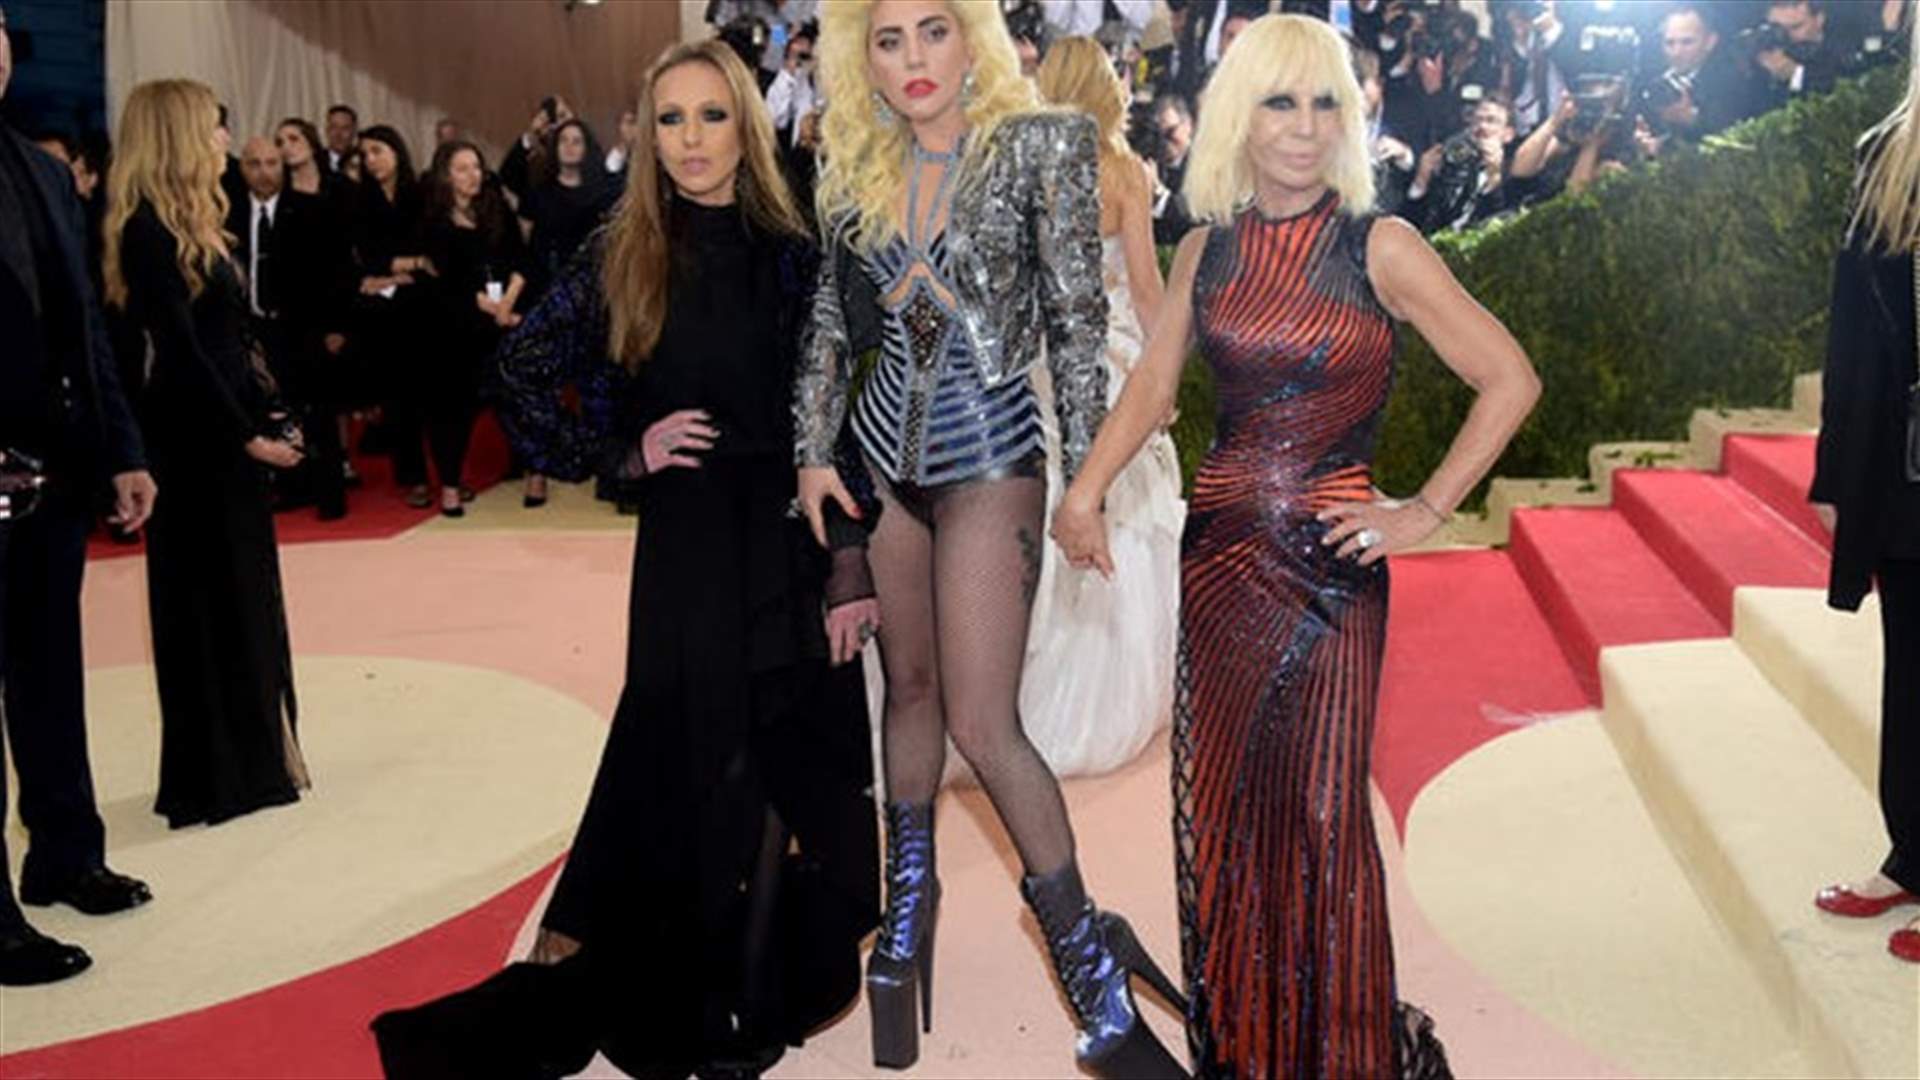 Light-up gowns and gladiators: Met Gala fashion was fierce